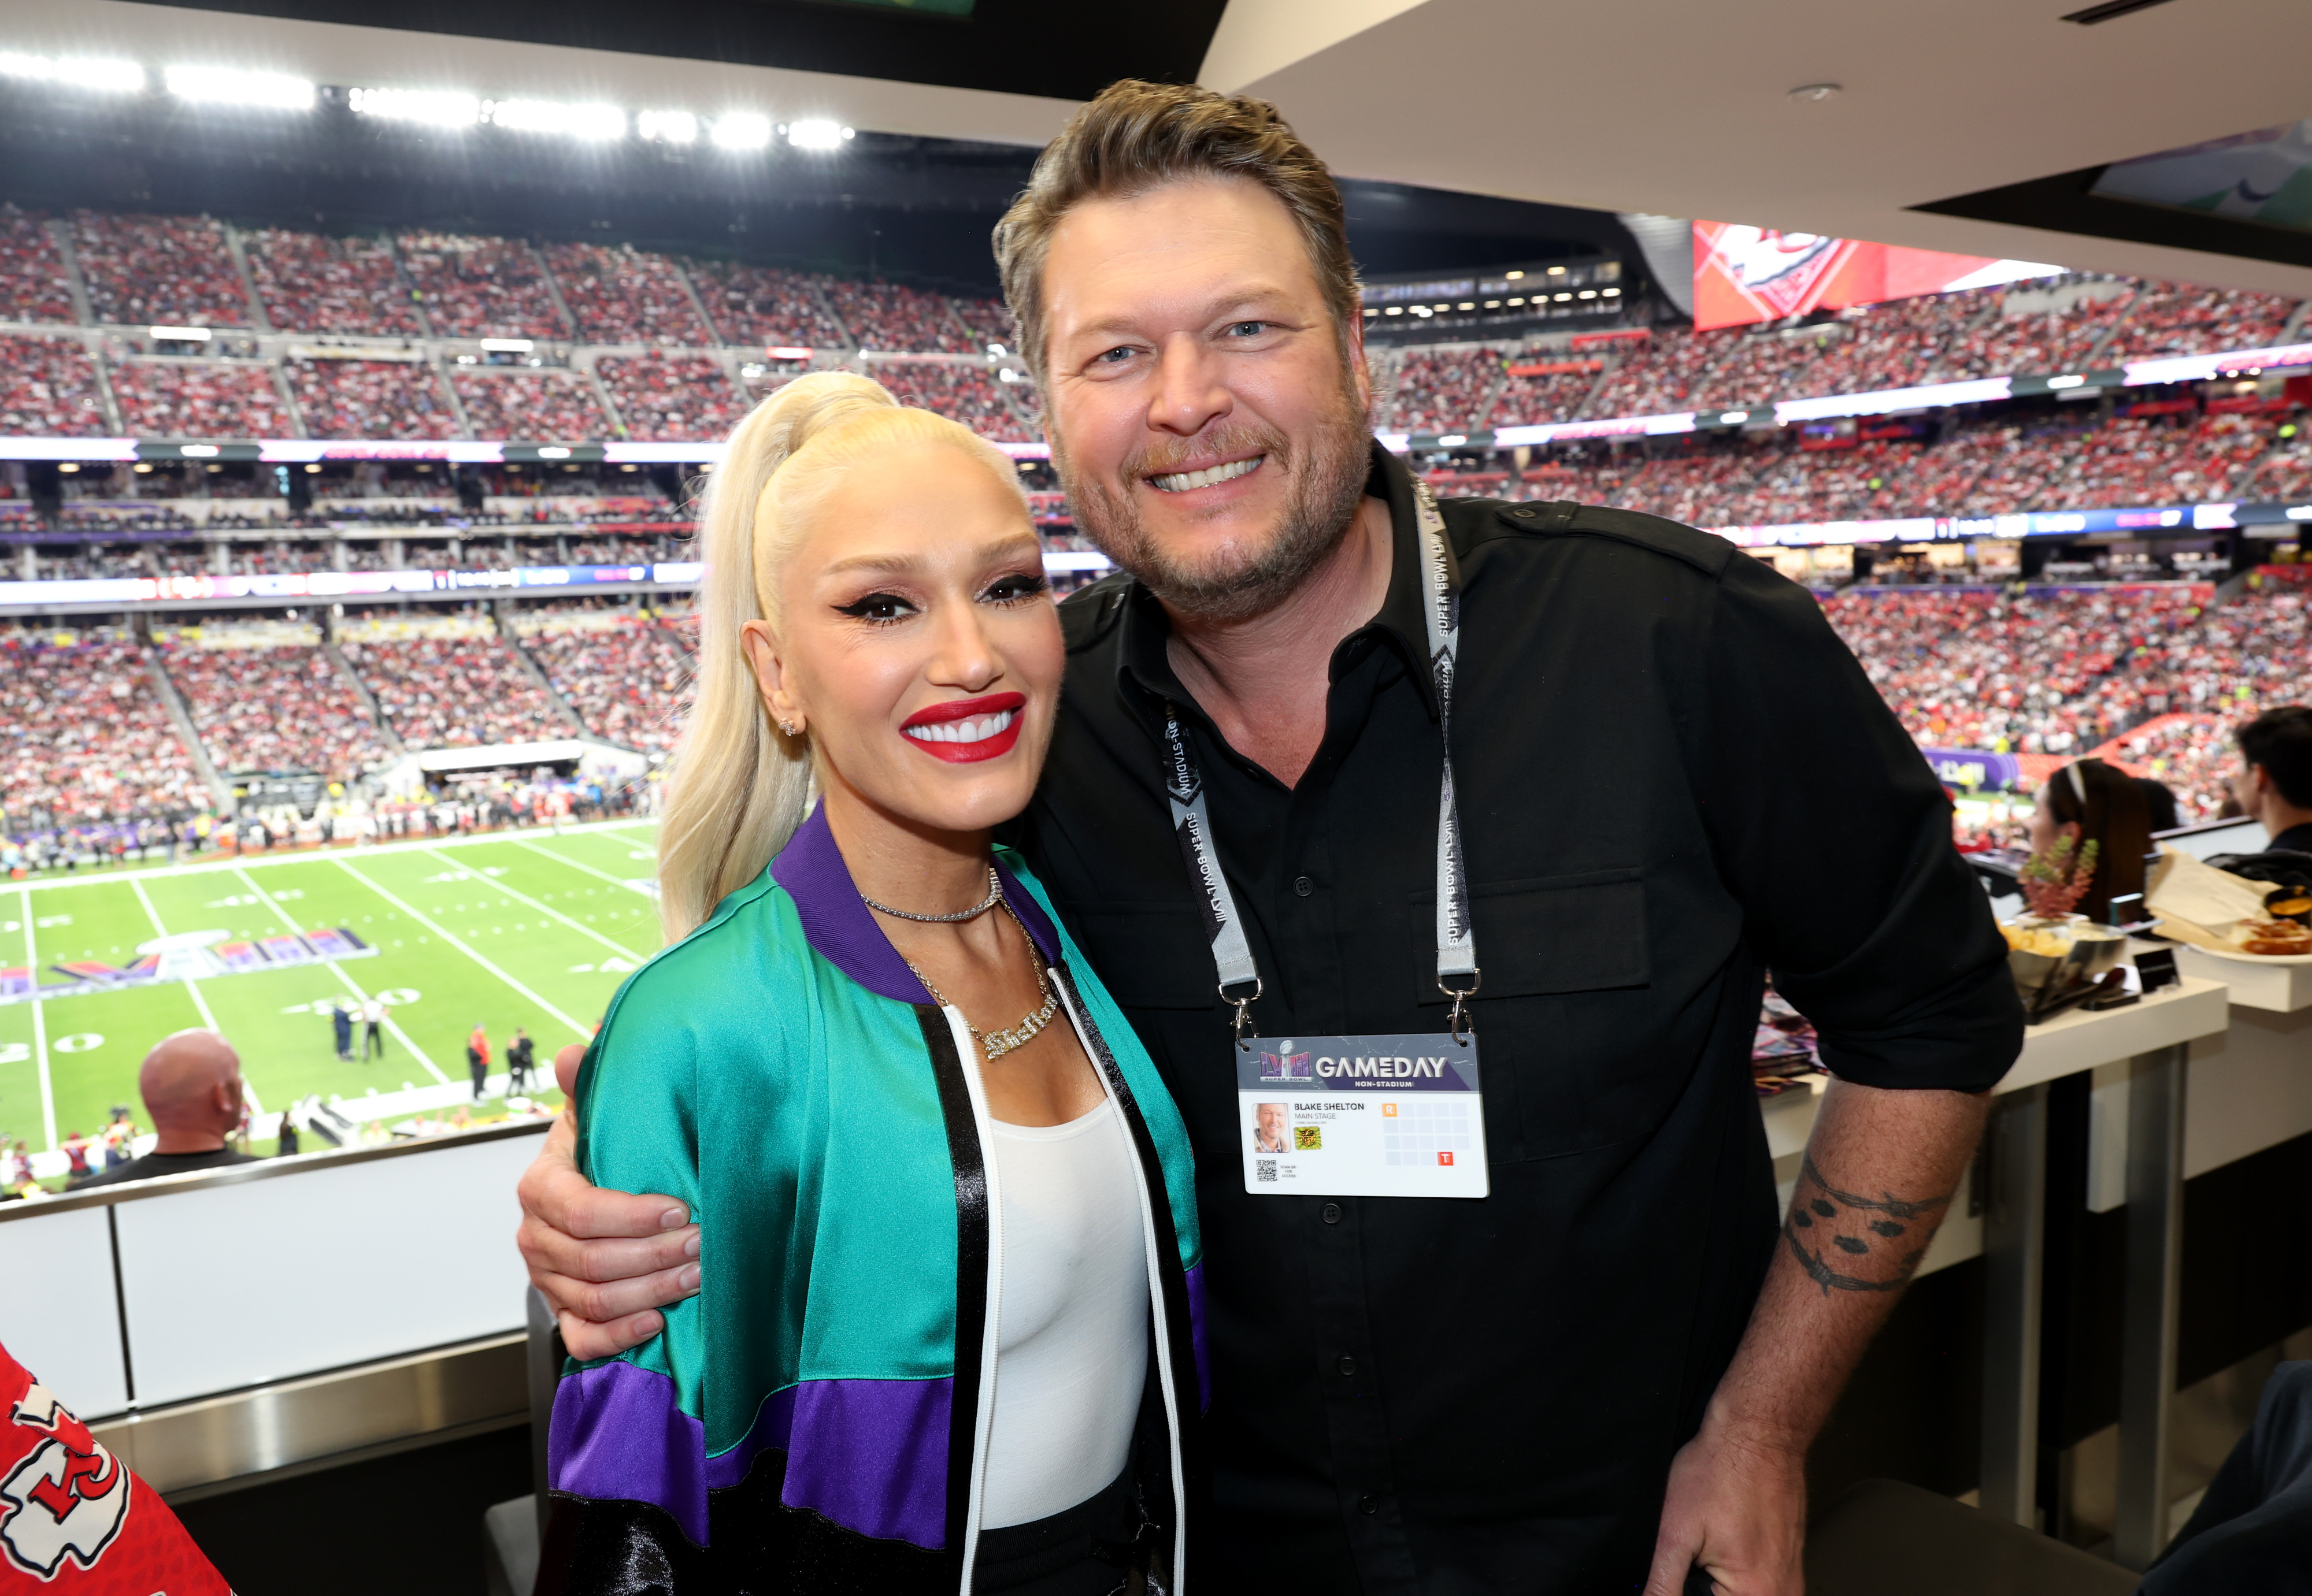 Rumors have been swirling that Gwen and Blake are having marriage problems